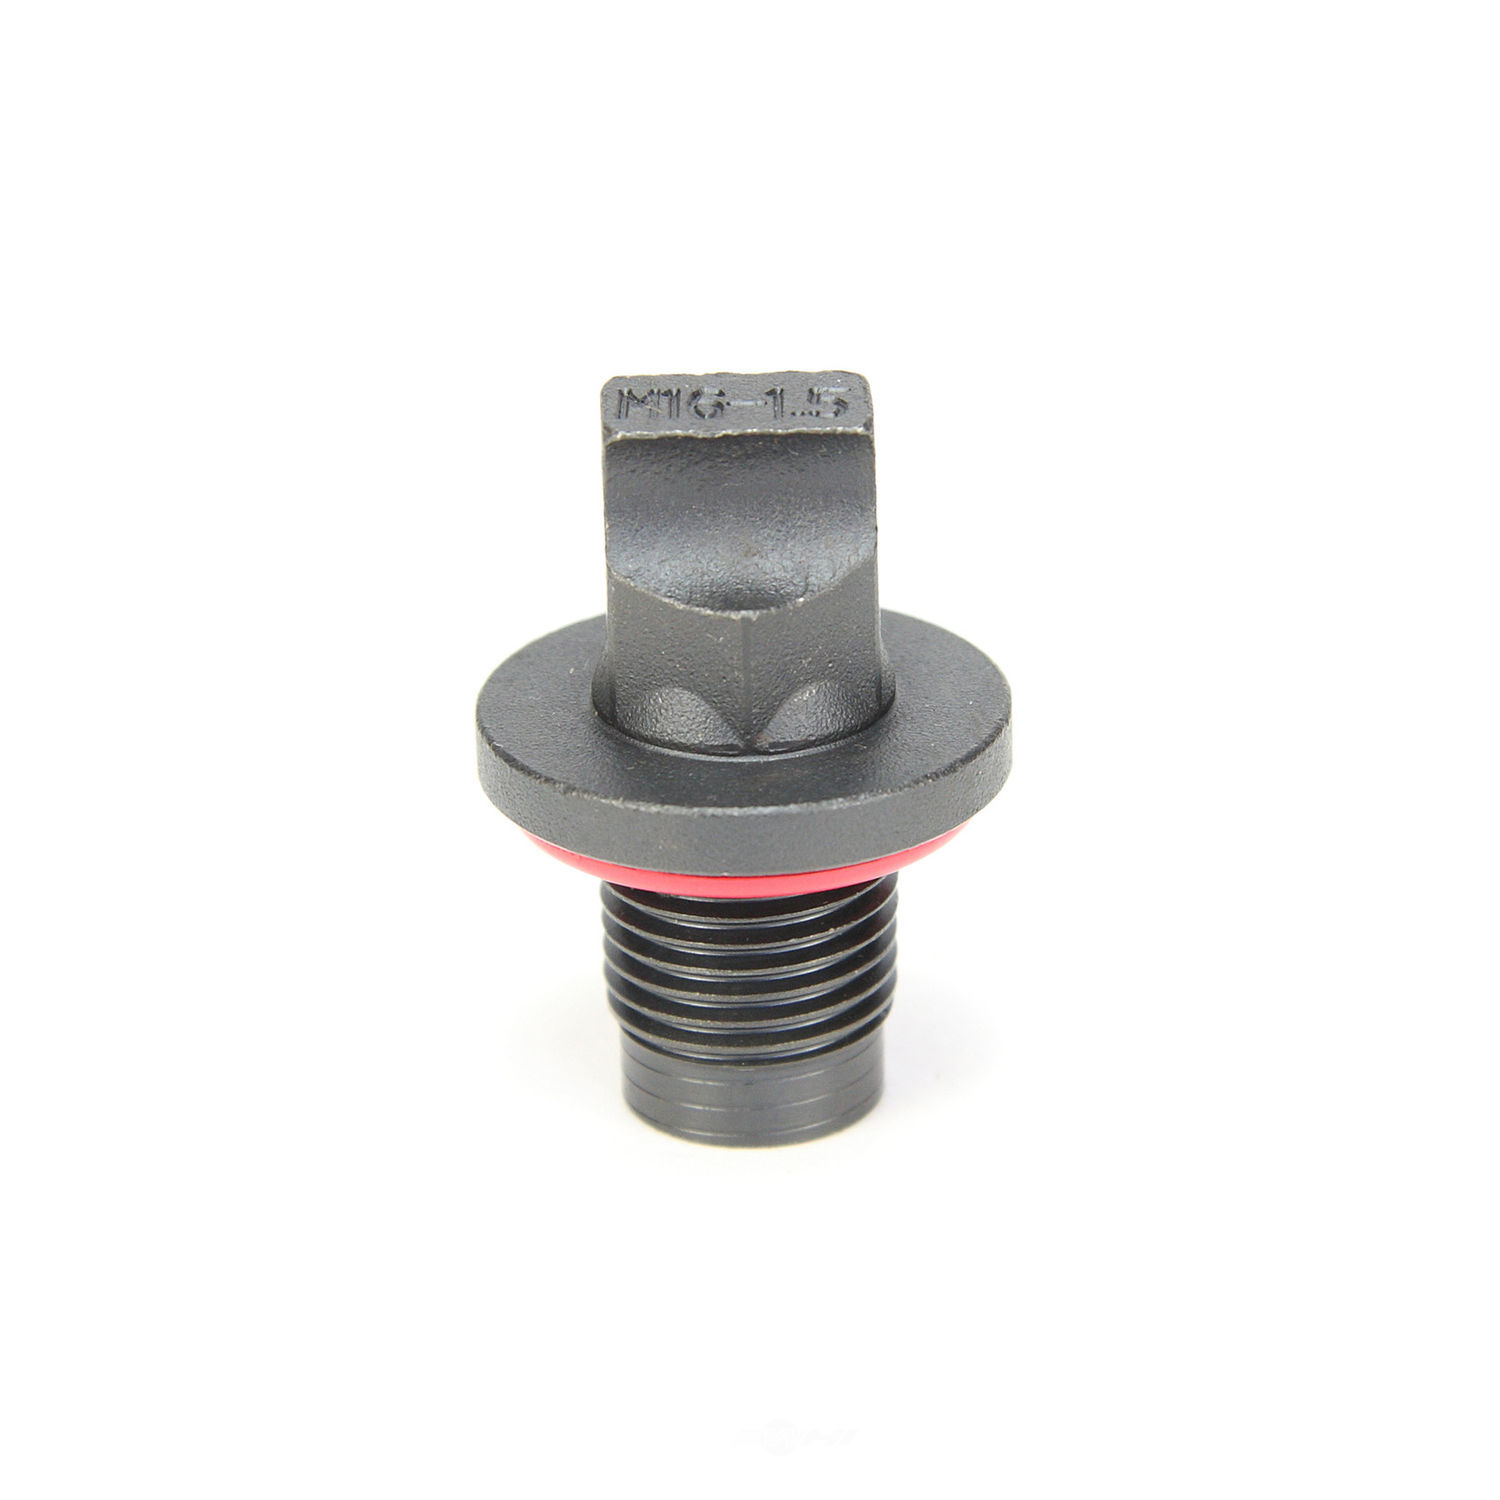 AGS COMPANY - Accufit Oil Drain Plug M16x1.50, Bag - AGS ODP-00012B